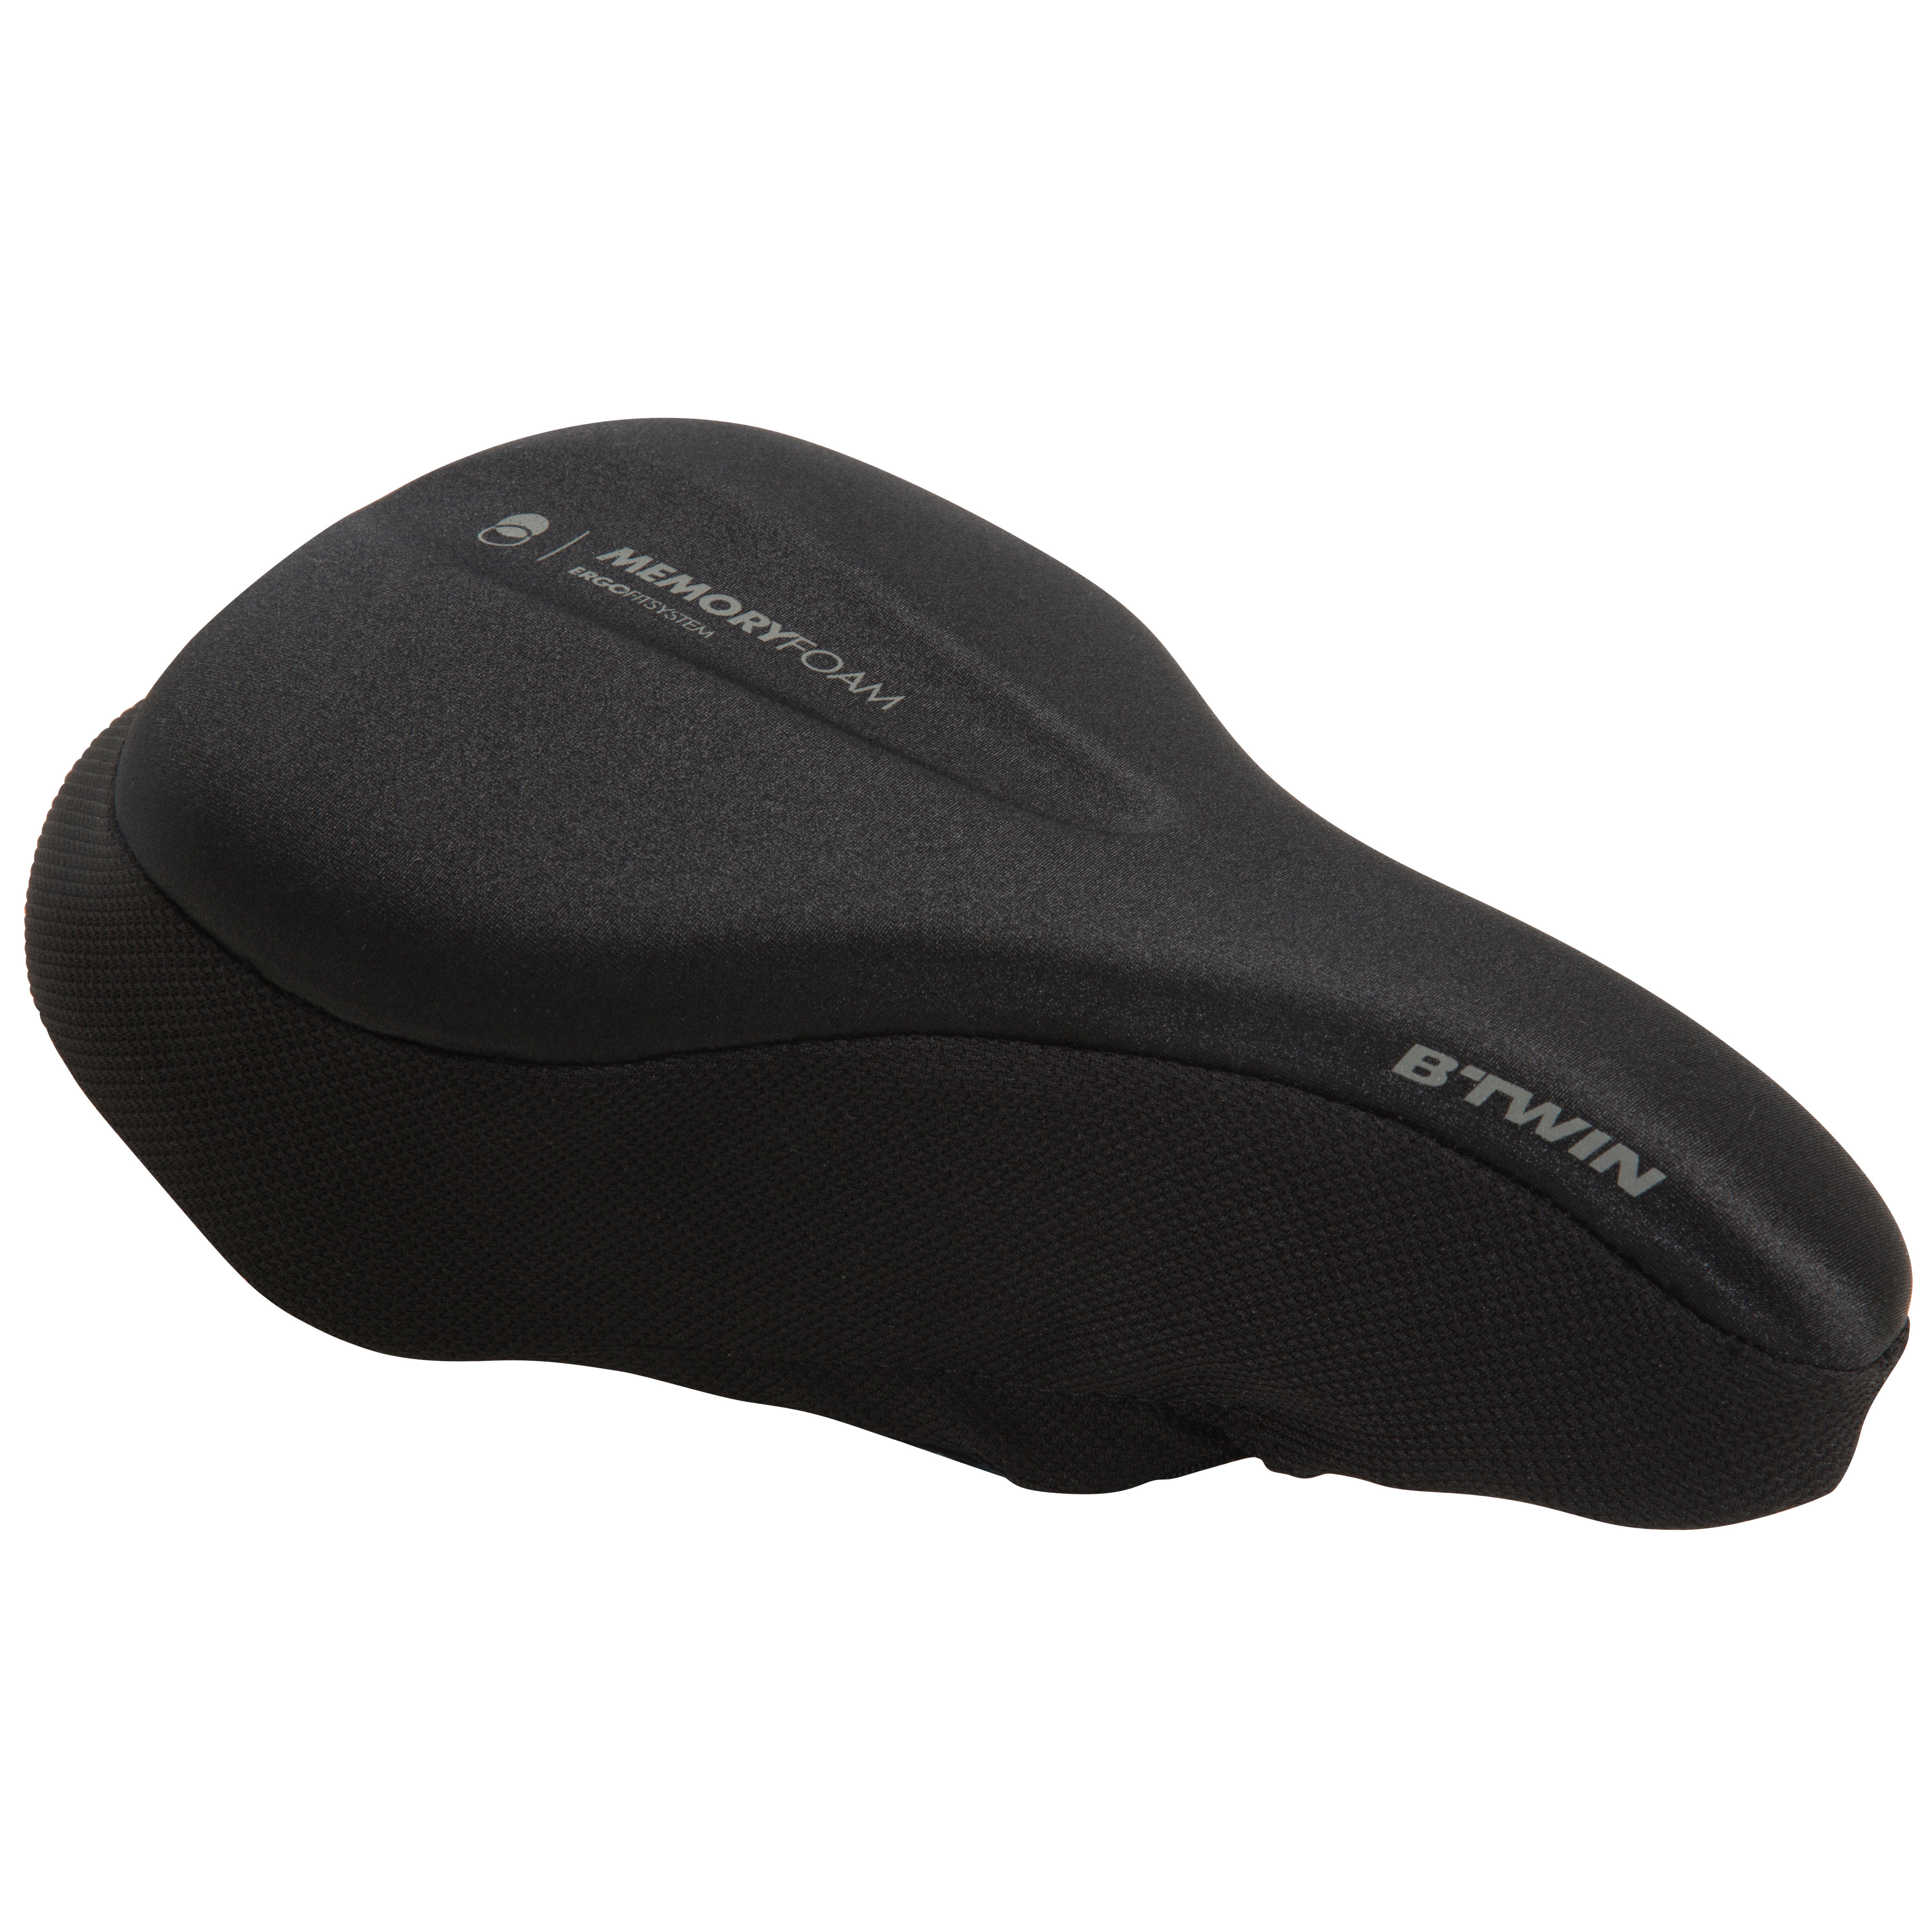 cycle seat cover under 200